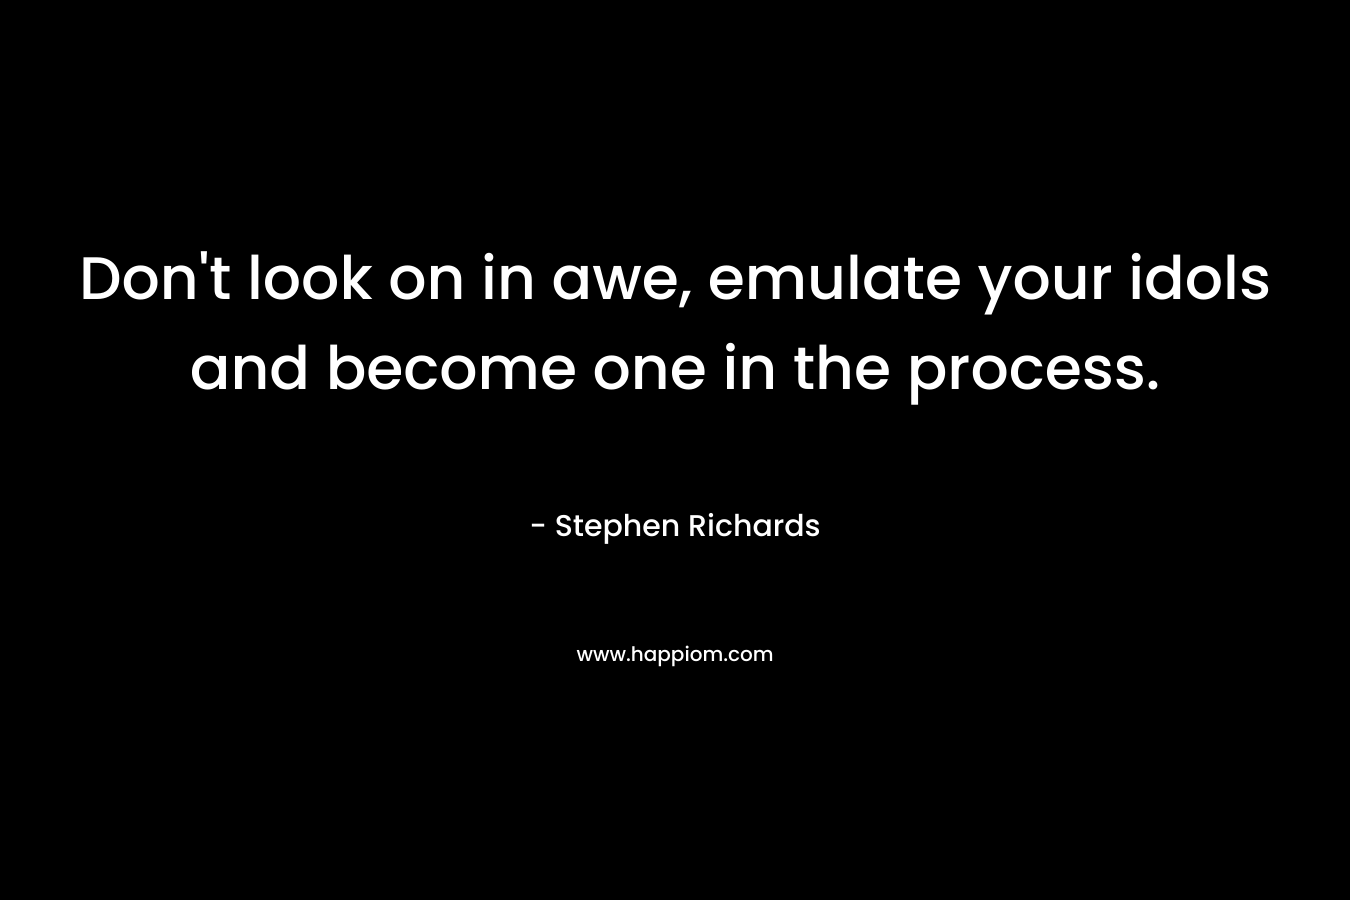 Don’t look on in awe, emulate your idols and become one in the process. – Stephen Richards